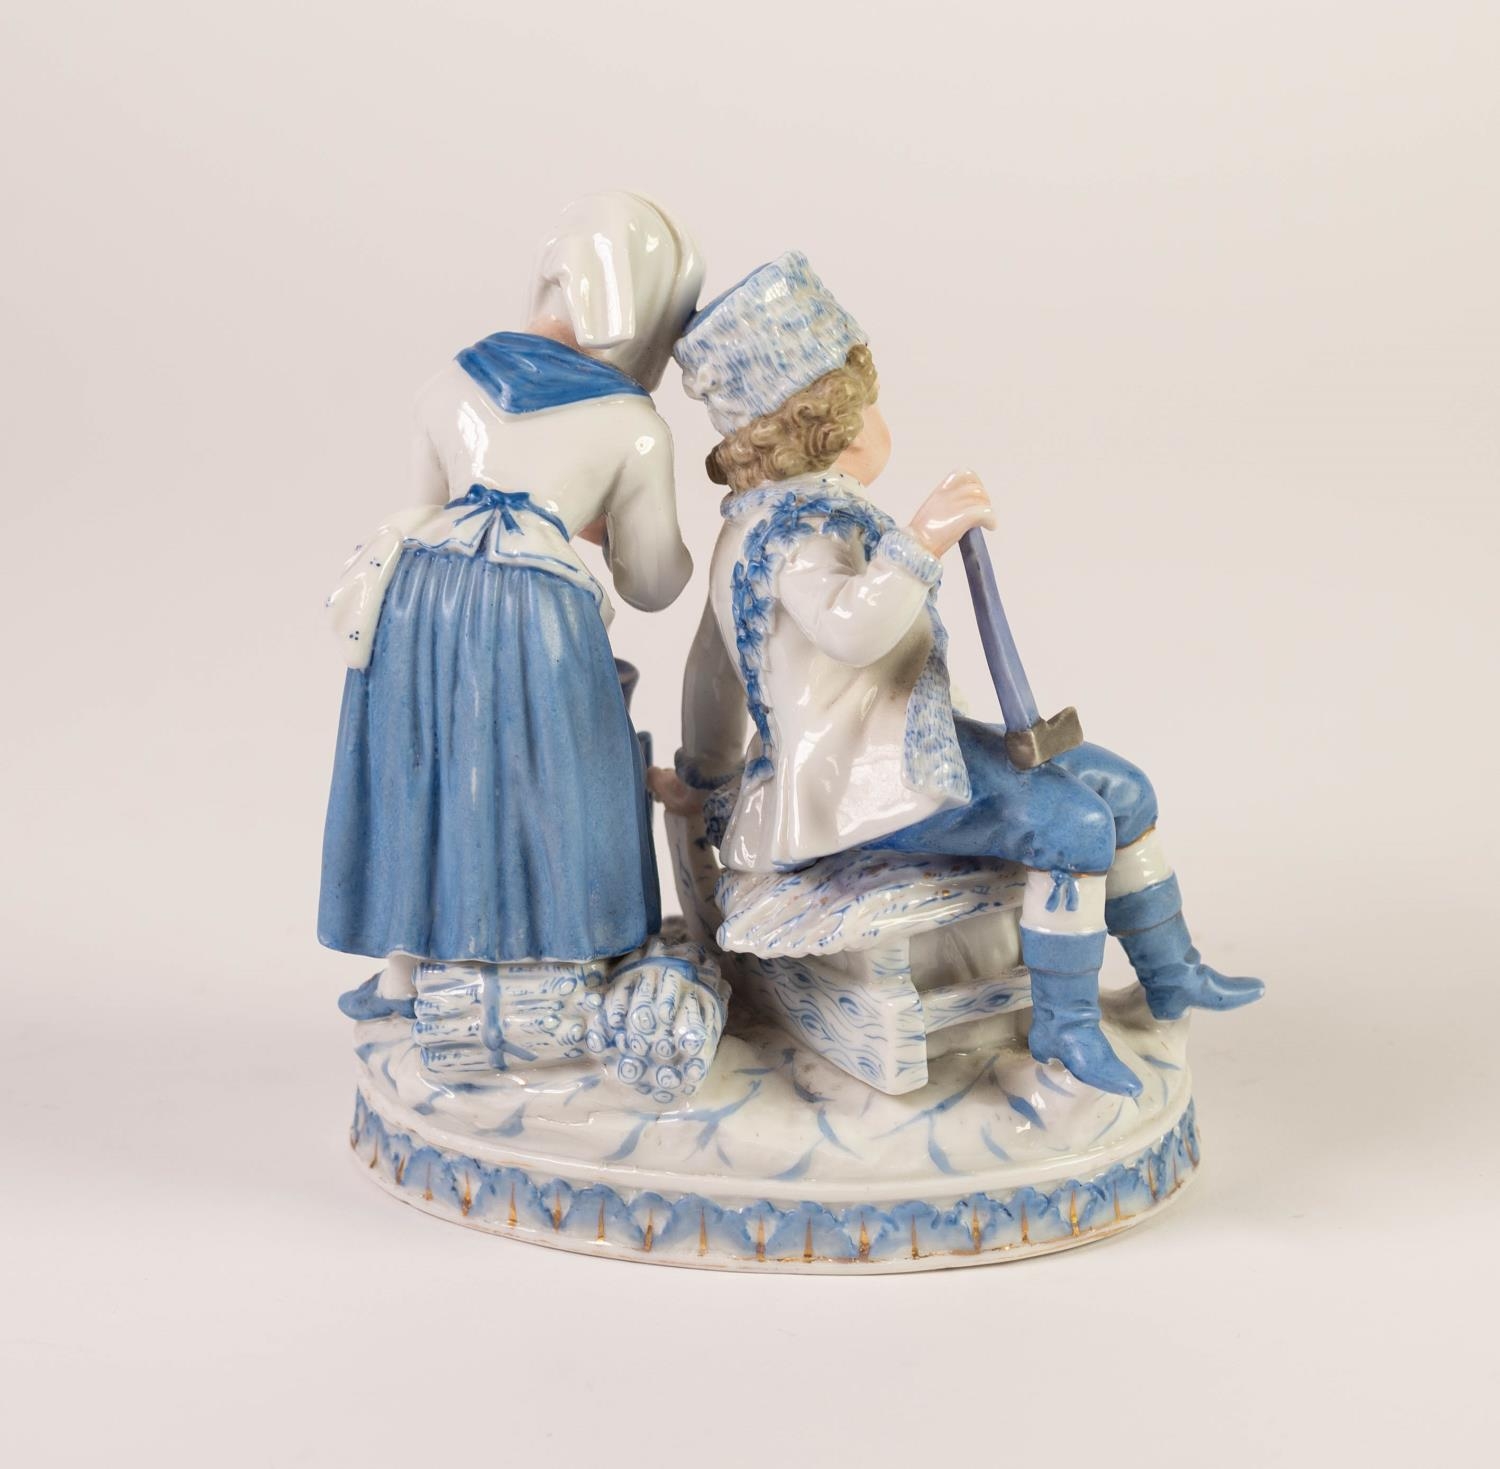 19th CENTURY GIULIO RICHARD, MILAN, PORCELAIN GROUP EMBLEMATIC OF WINTER, possibly from a set of - Image 2 of 3